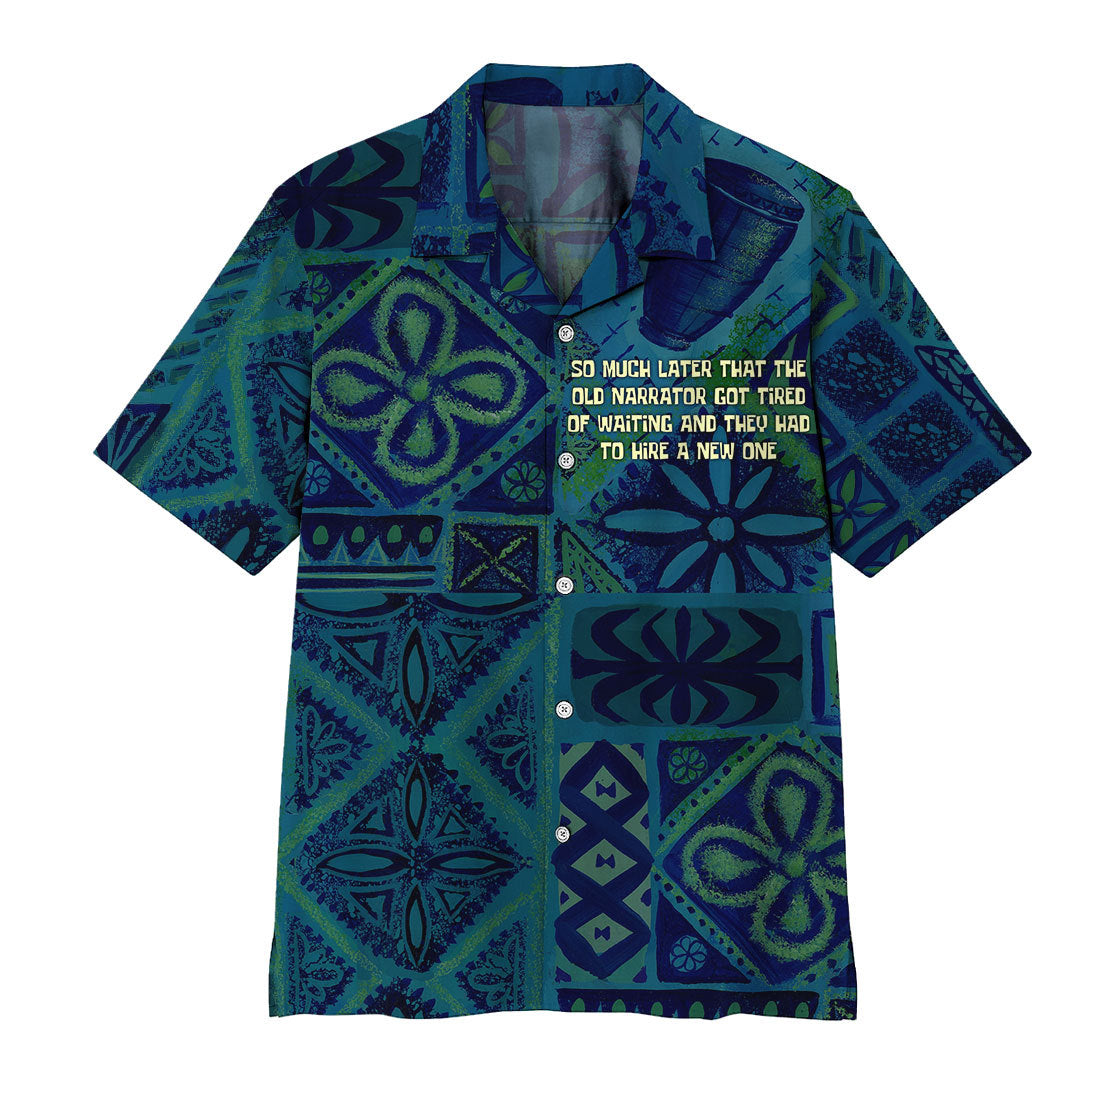 So Much Later That The Old Narrator Got Tired Of Waiting And They Had To Hire A New One Hawaii Shirt